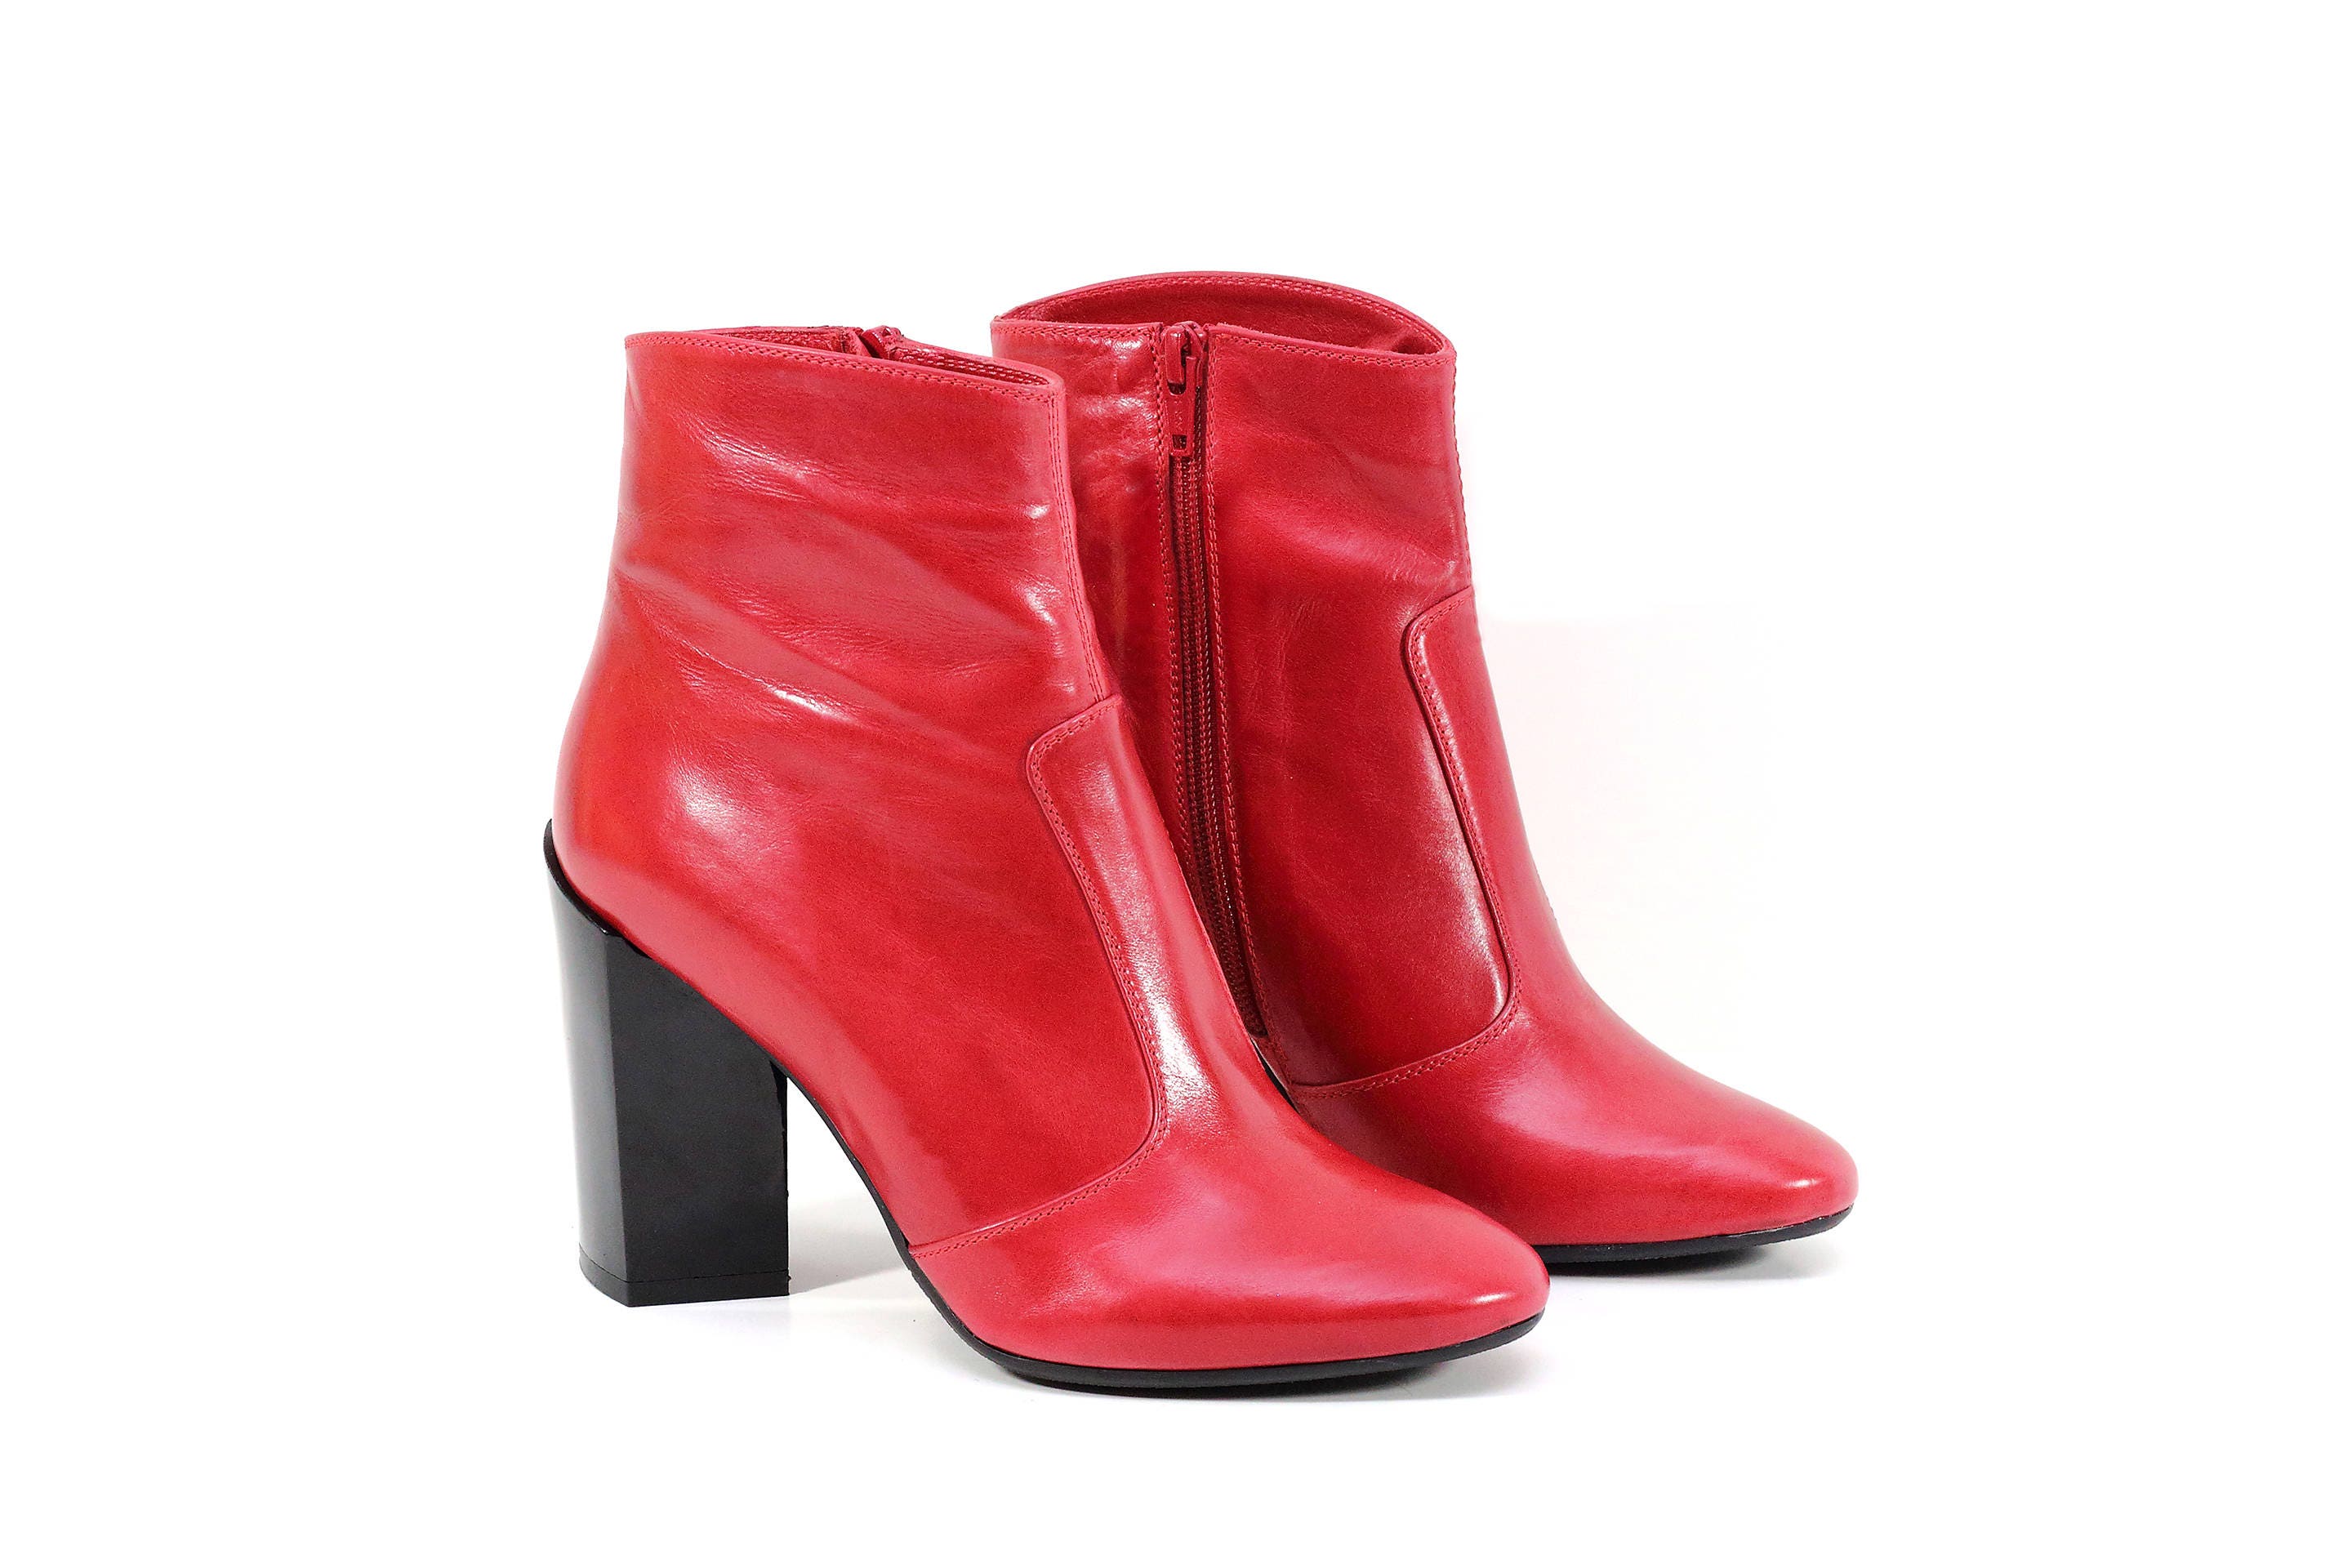 Elegant Women's Boots, Red Ankle Boots, Genuine Leather Boots, Red ...